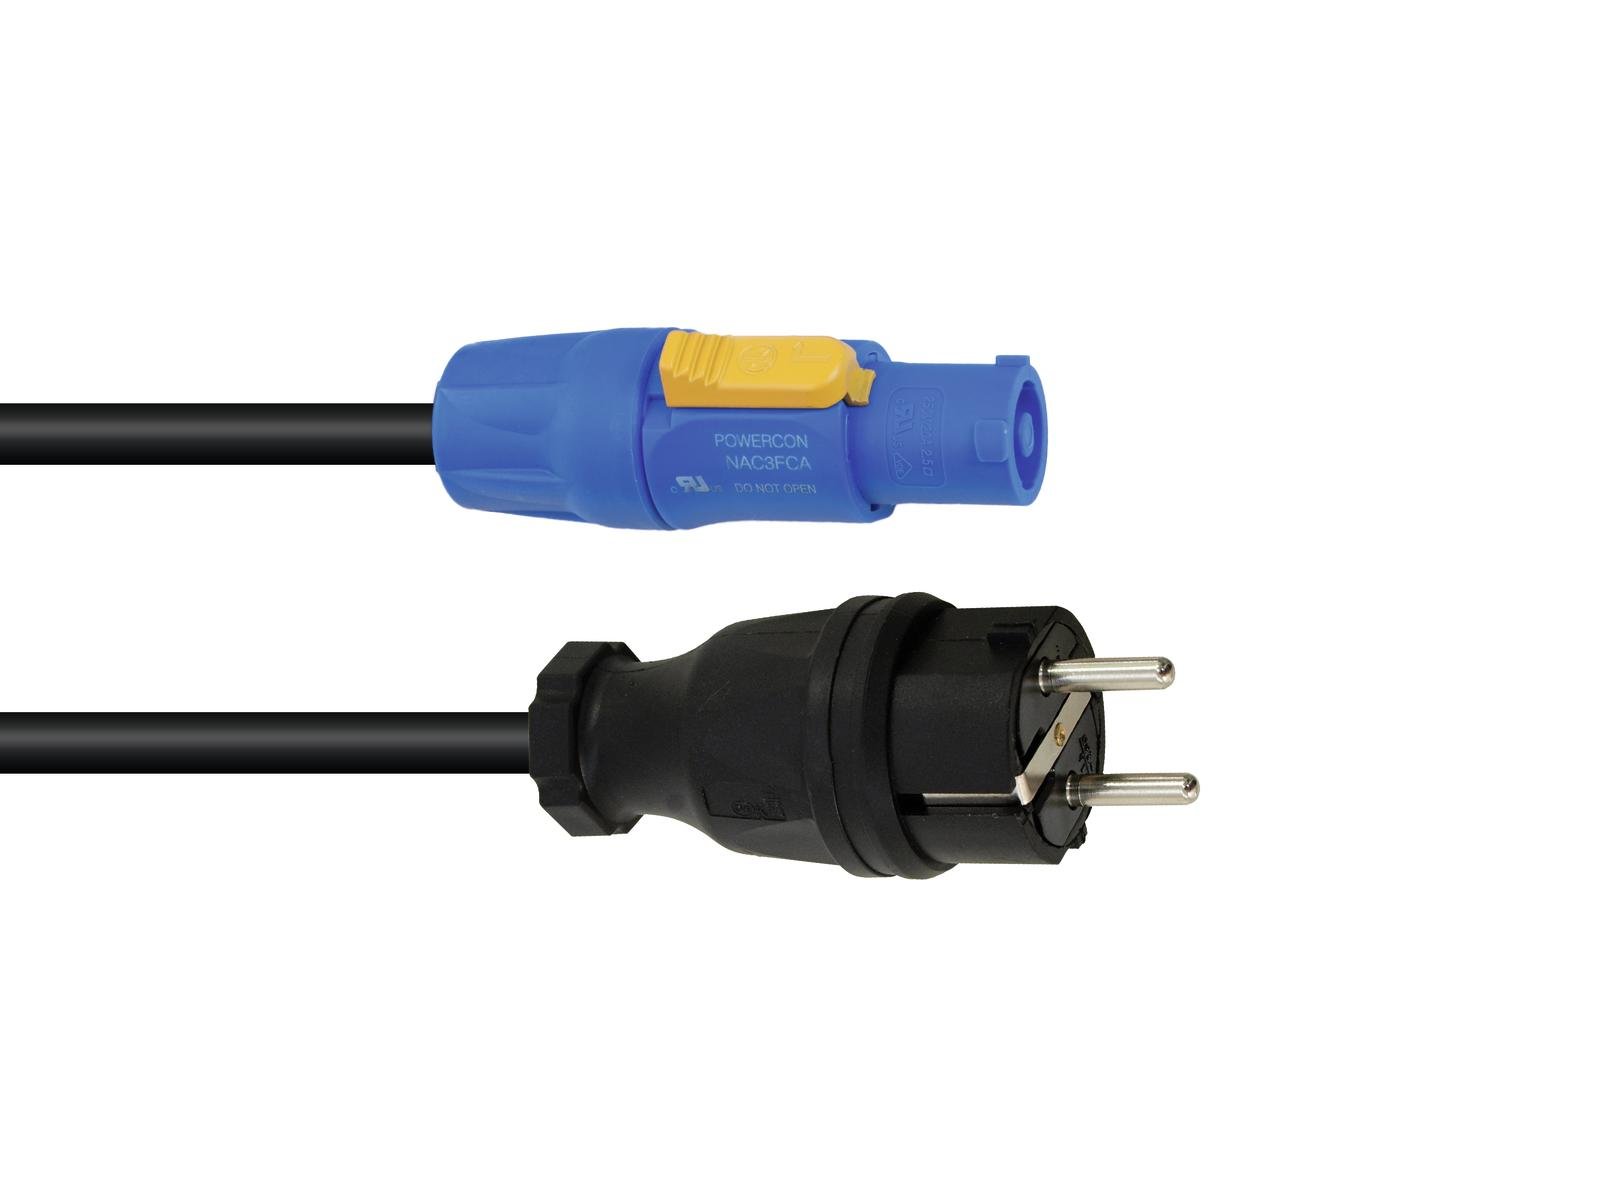 PSSO PowerCon Power Cable 3×1.5 5m H07RN-F